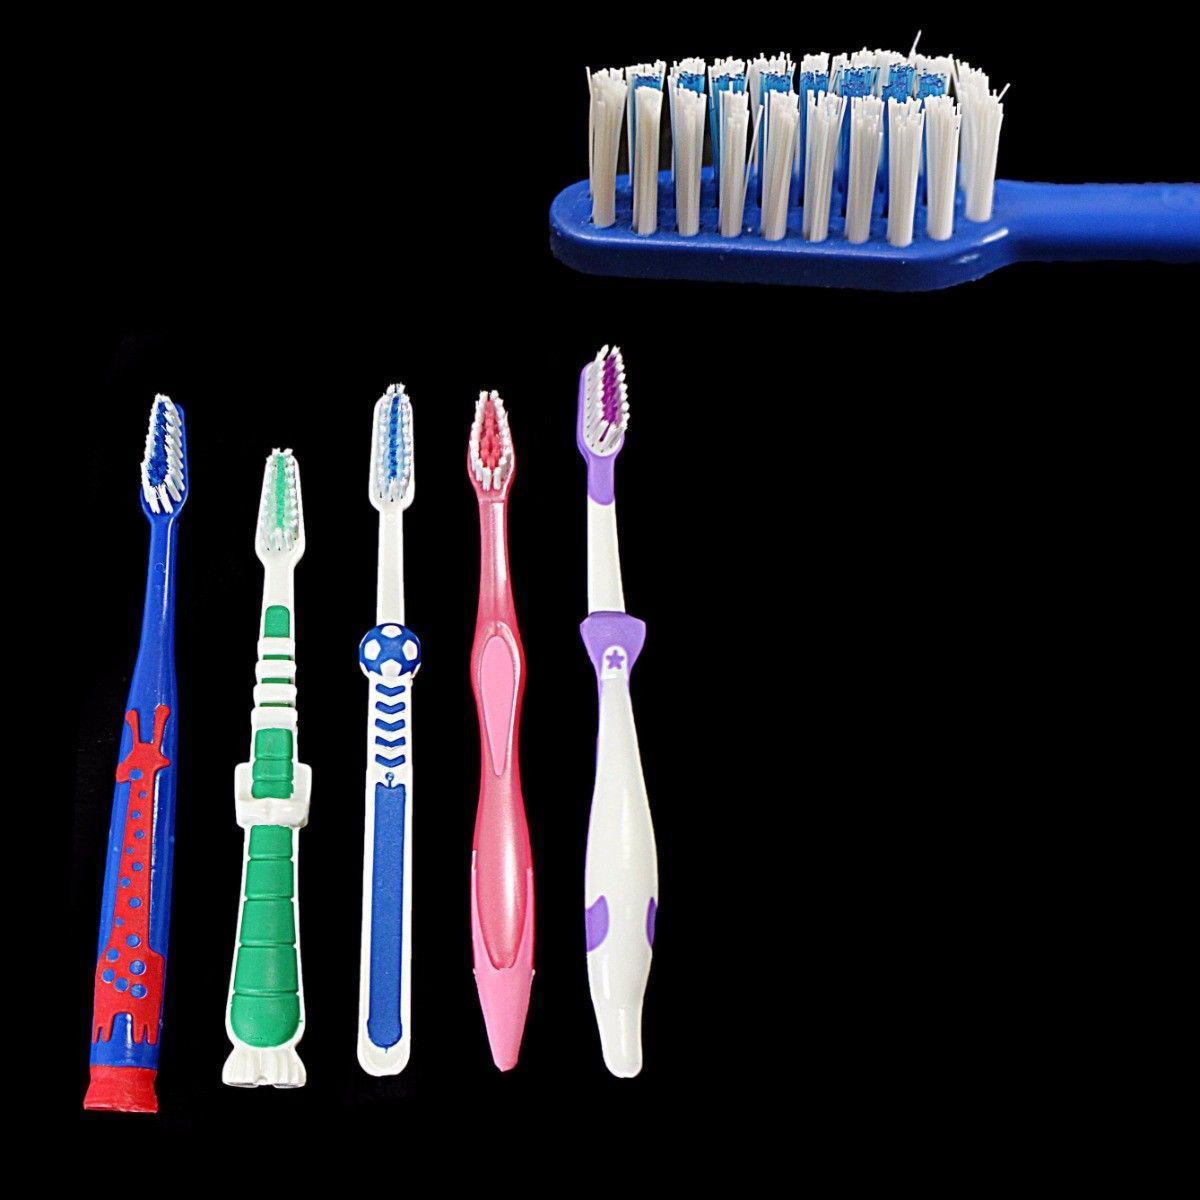 Pack Of 5 Childrens Assorted Colour Soft Oral Care Toothbrushes 8804 (Large Letter Rate)